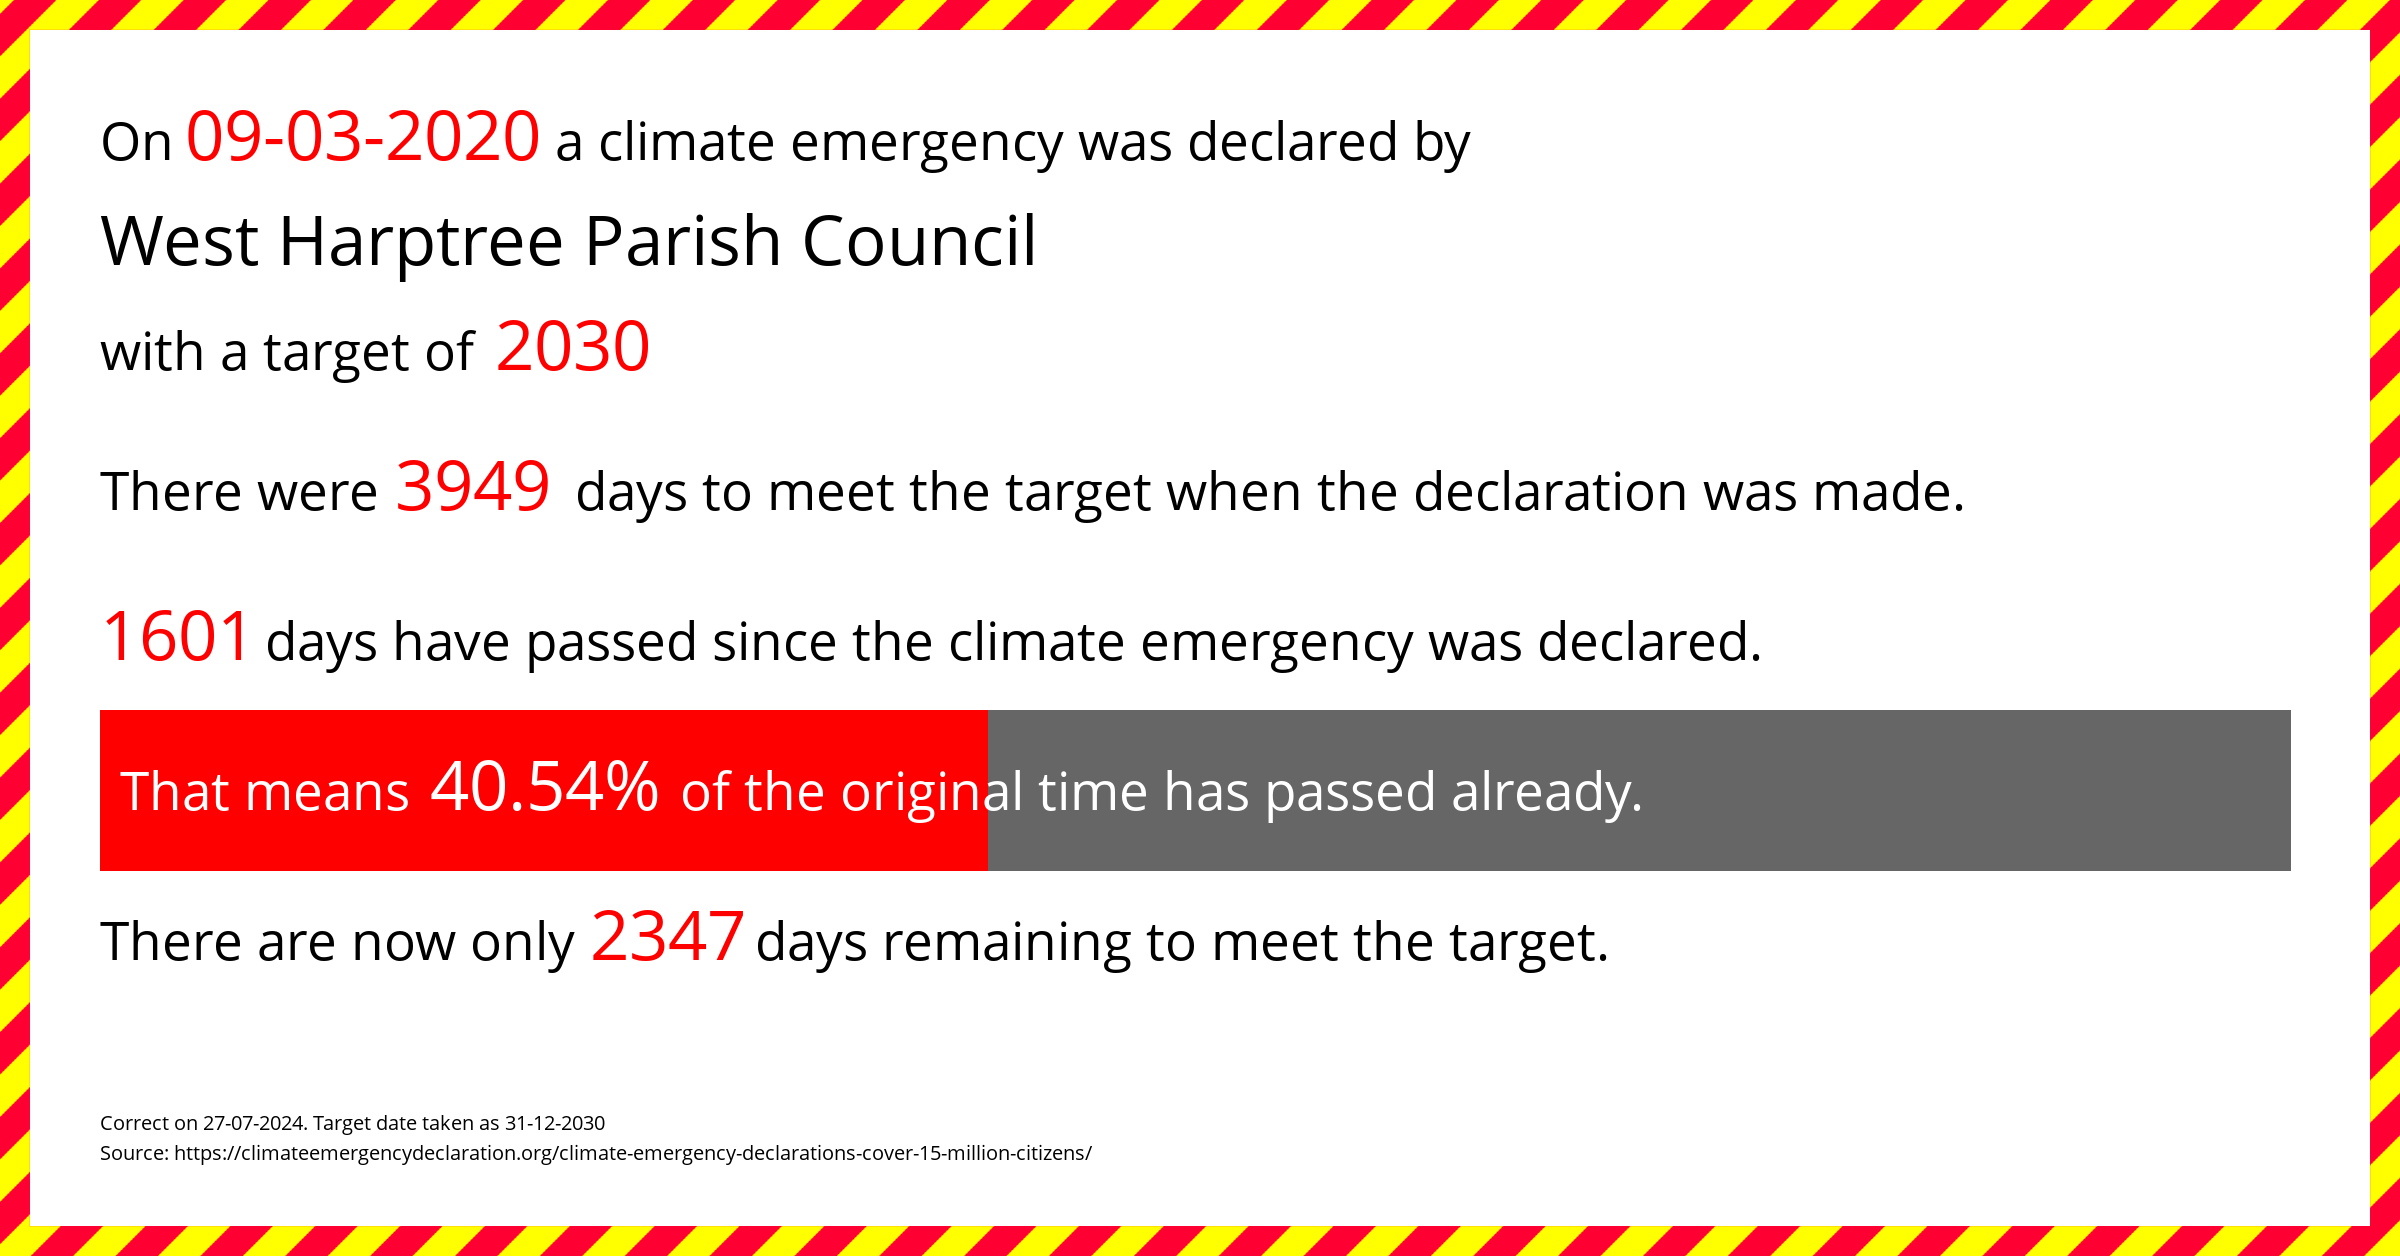 West Harptree Parish Council  declared a Climate emergency on Monday 9th March 2020, with a target of 2030.